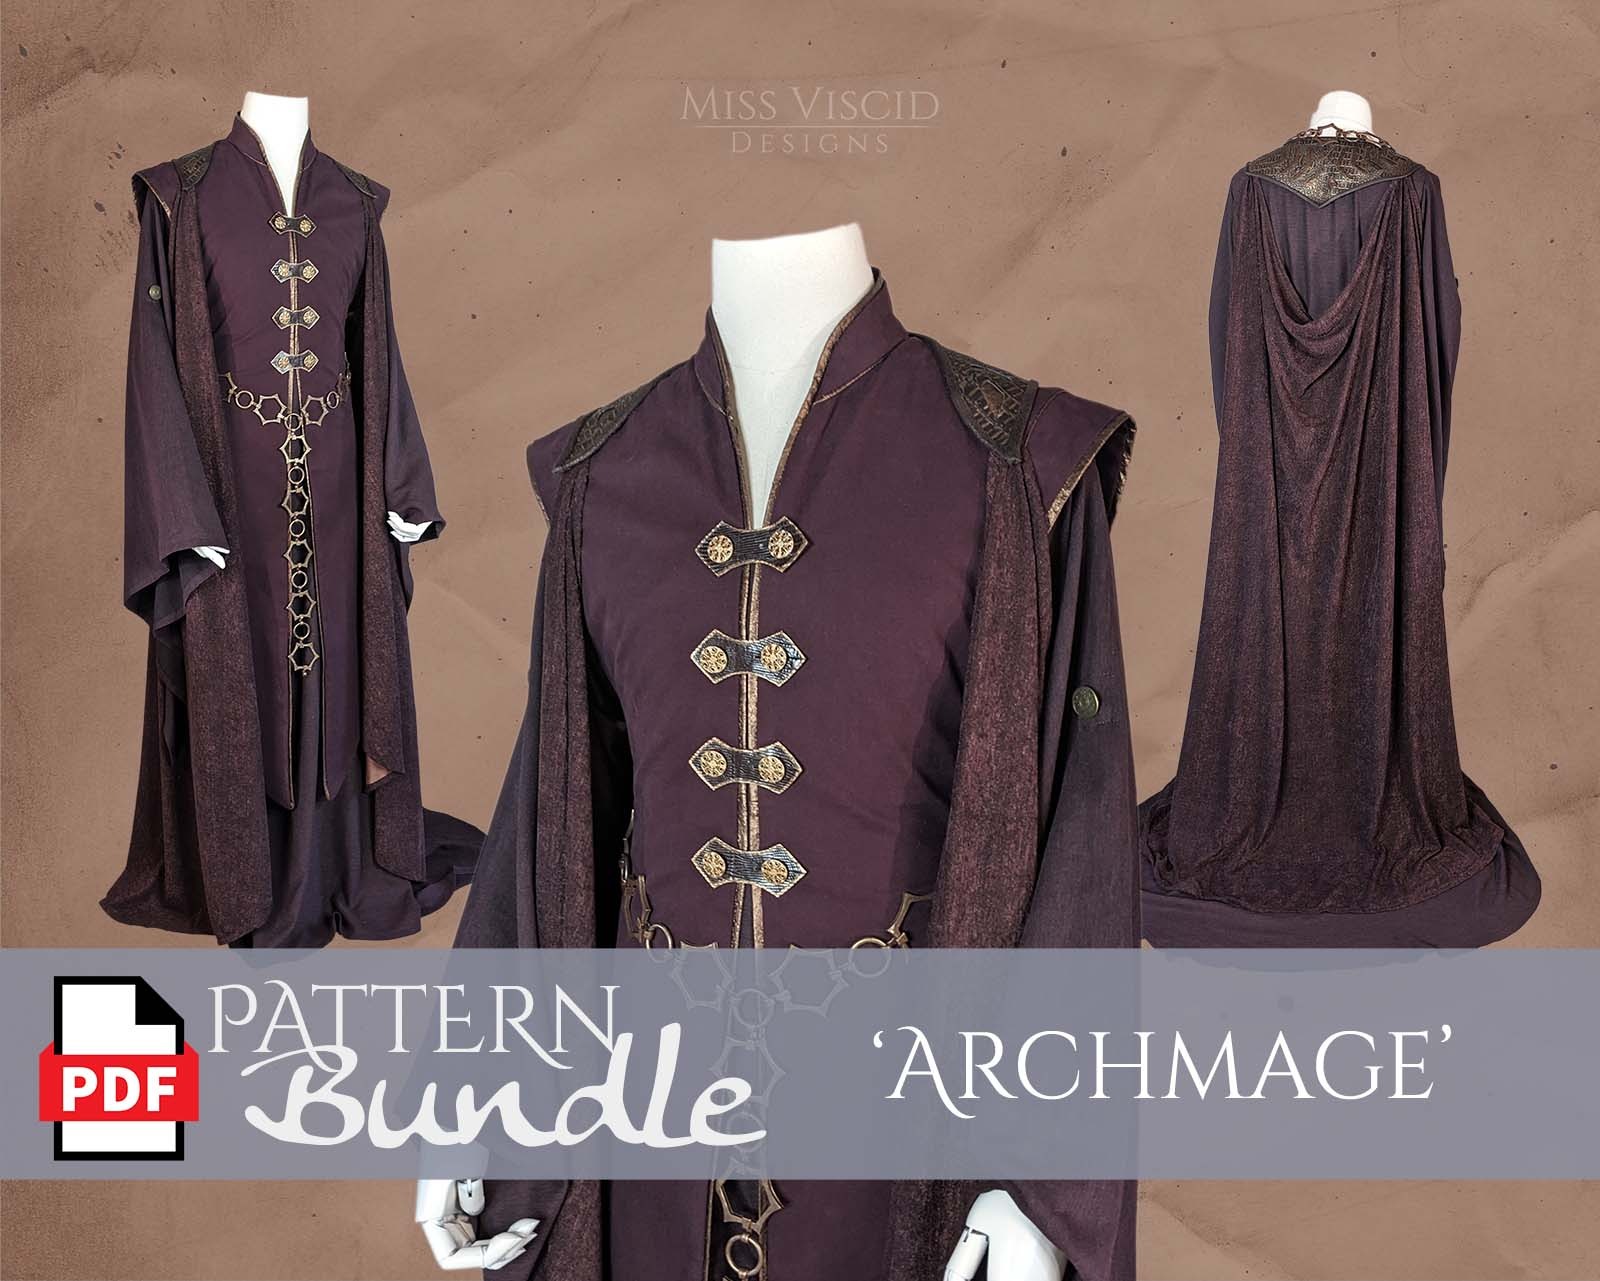 Mens PDF pattern bundle Archmage - 3 download patterns with sewing guides